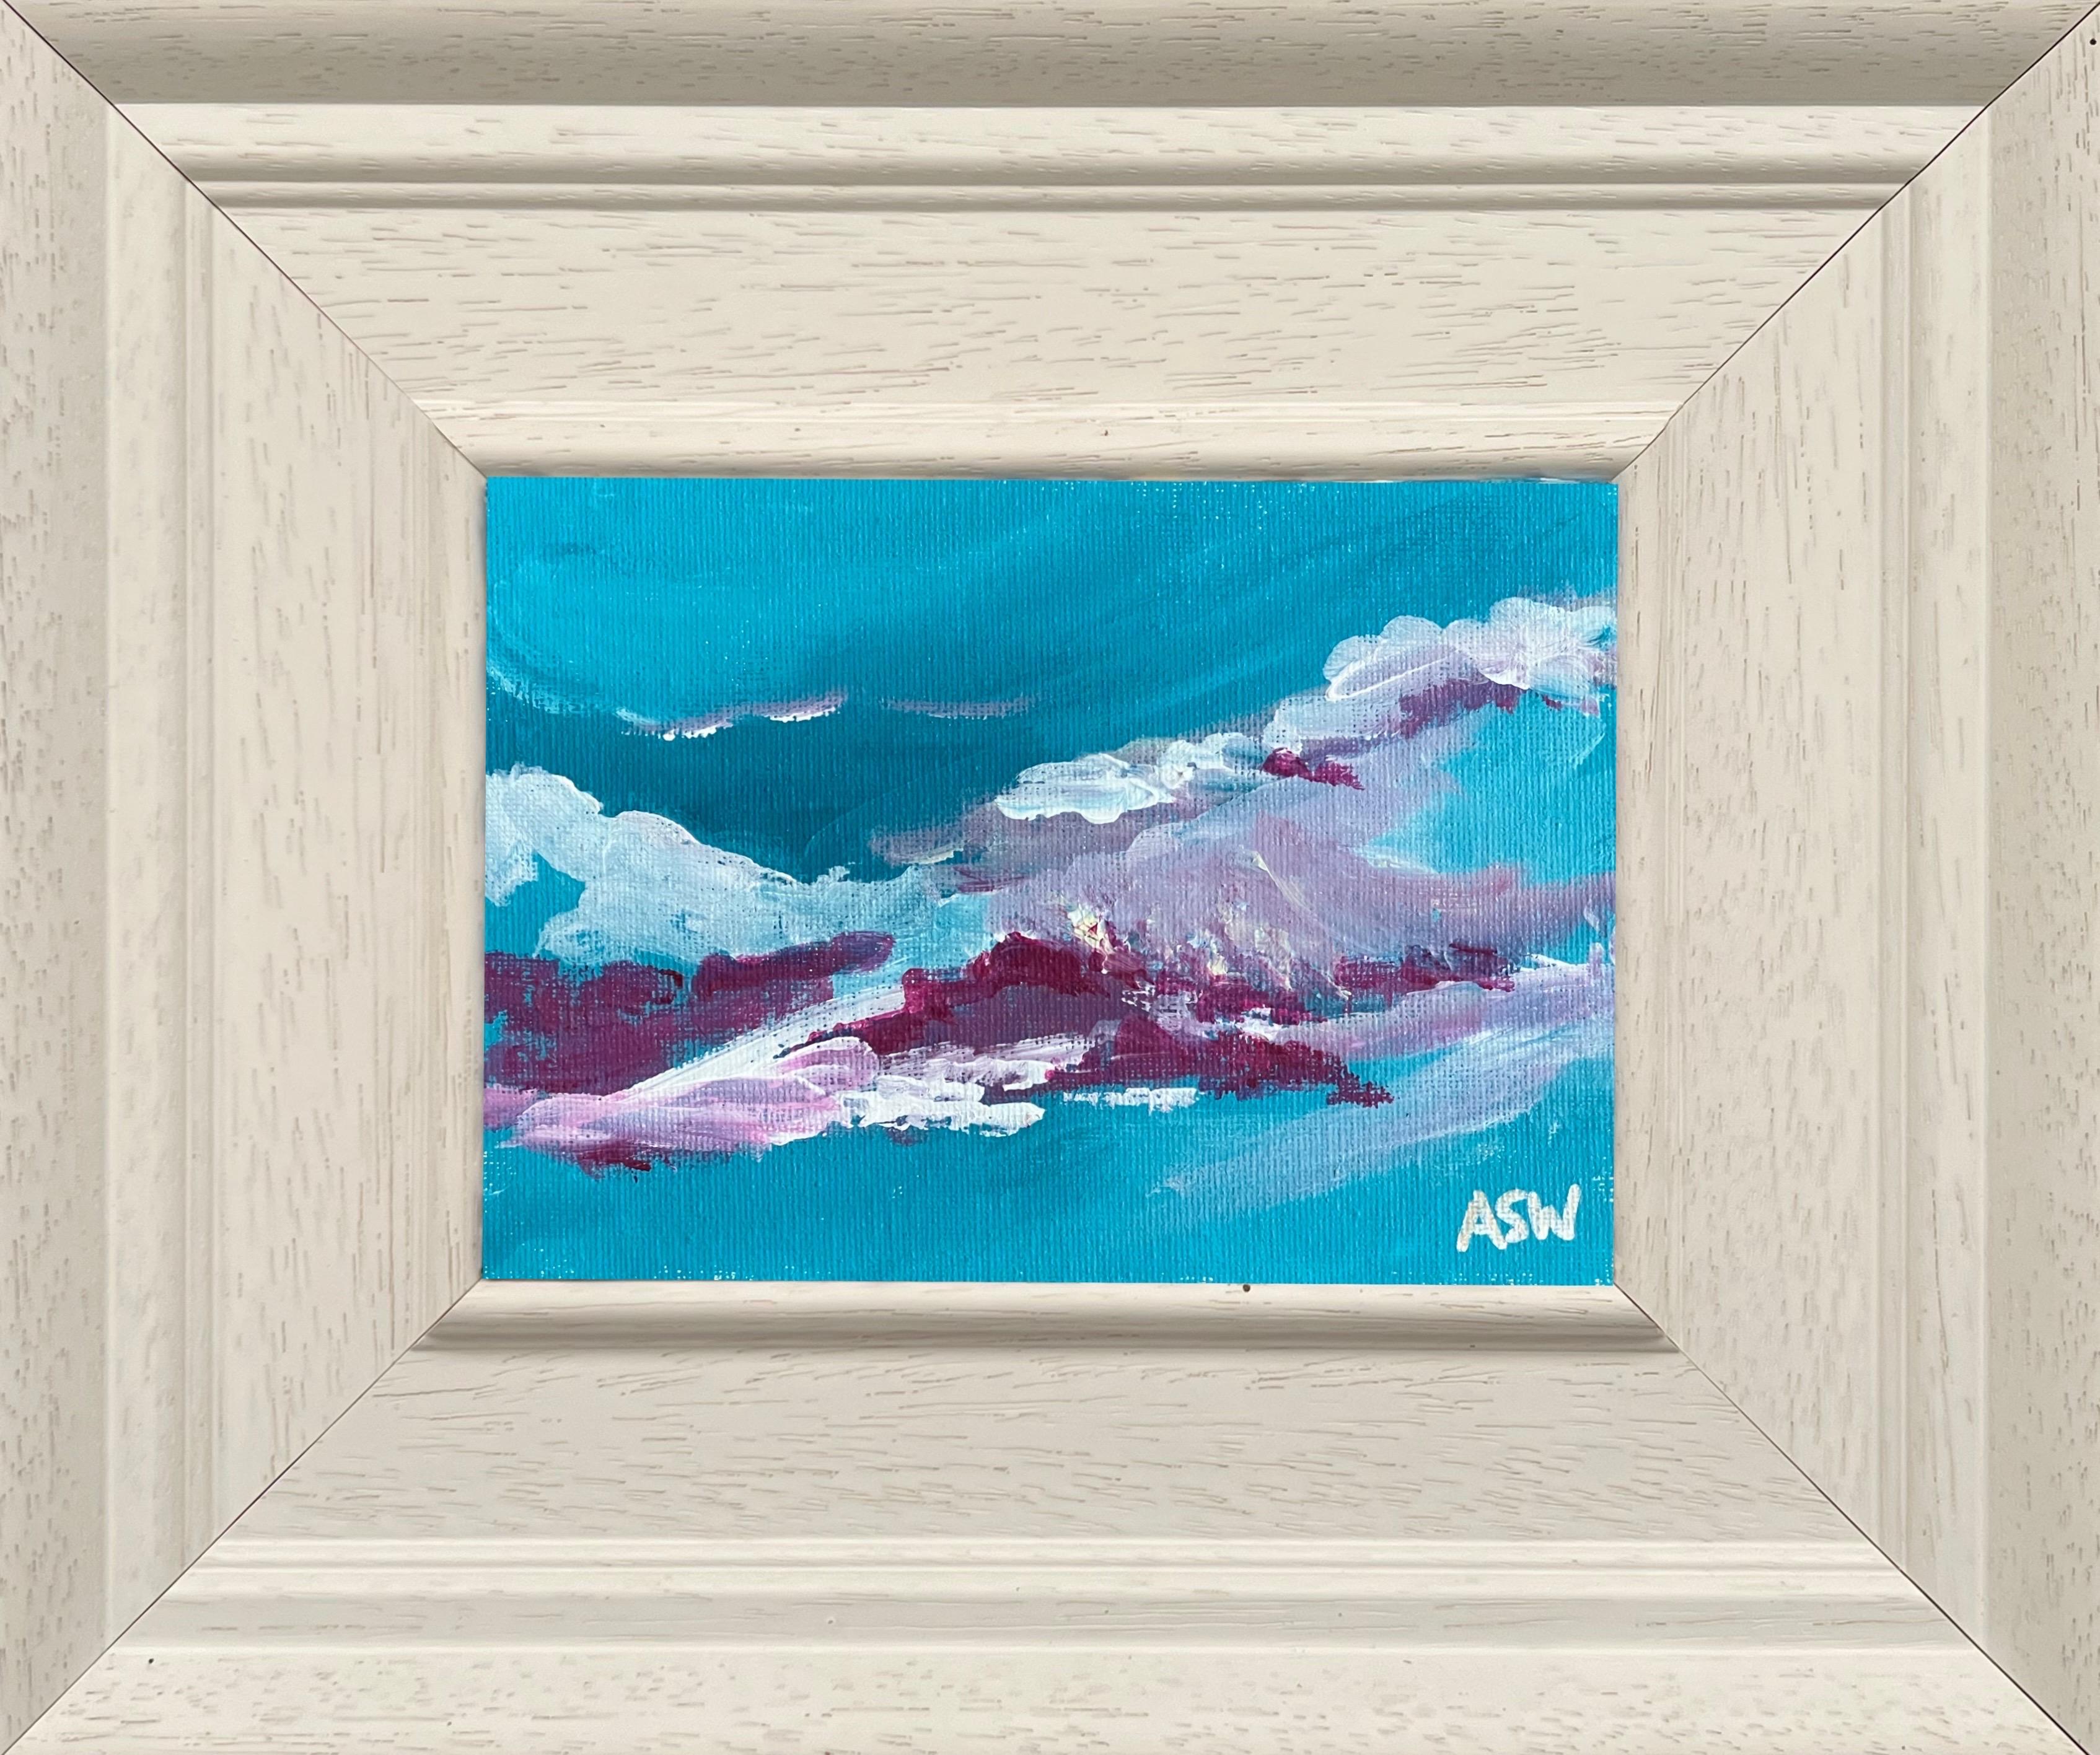 Angela Wakefield Landscape Painting - Miniature Abstract Painting Turquoise Background by Contemporary British Artist